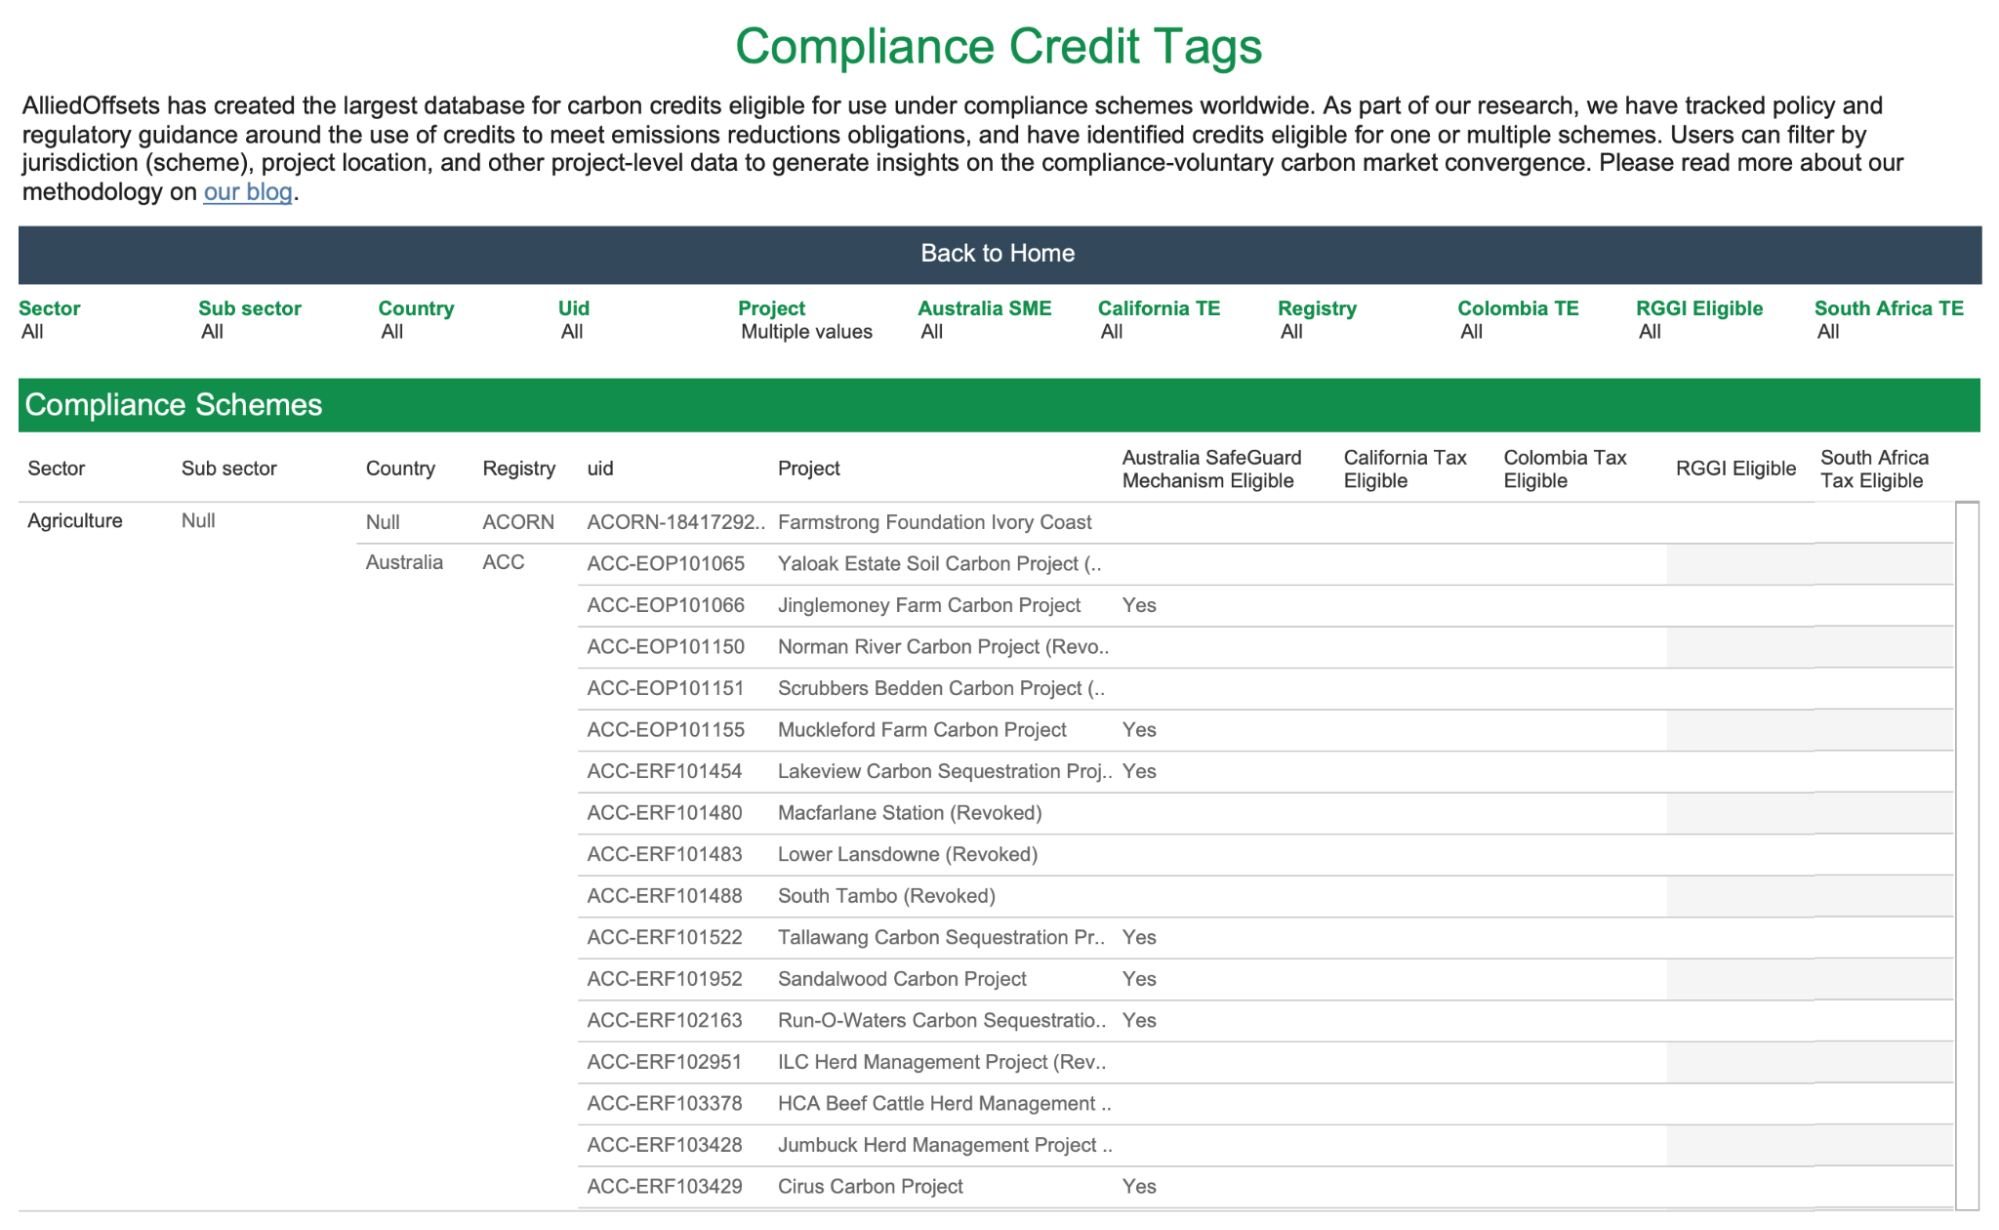 Introducing The AlliedOffsets’ Compliance Credit Tags Dataset